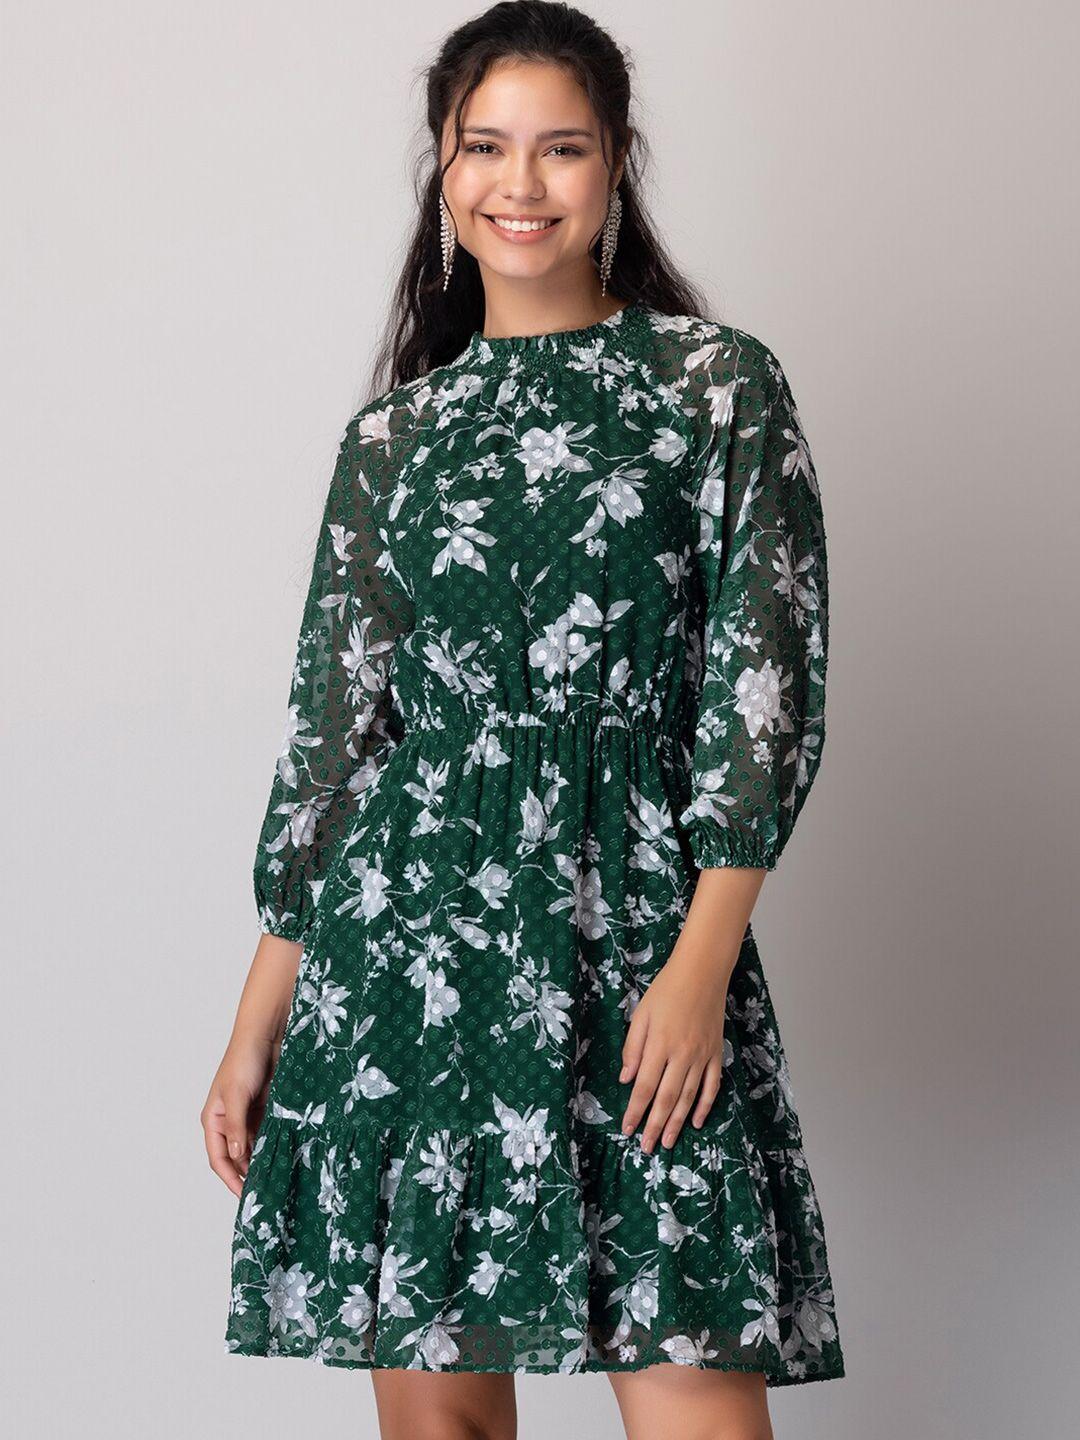 faballey-green-floral-printed-high-neck-smocked-detail-fit-&-flare-dress